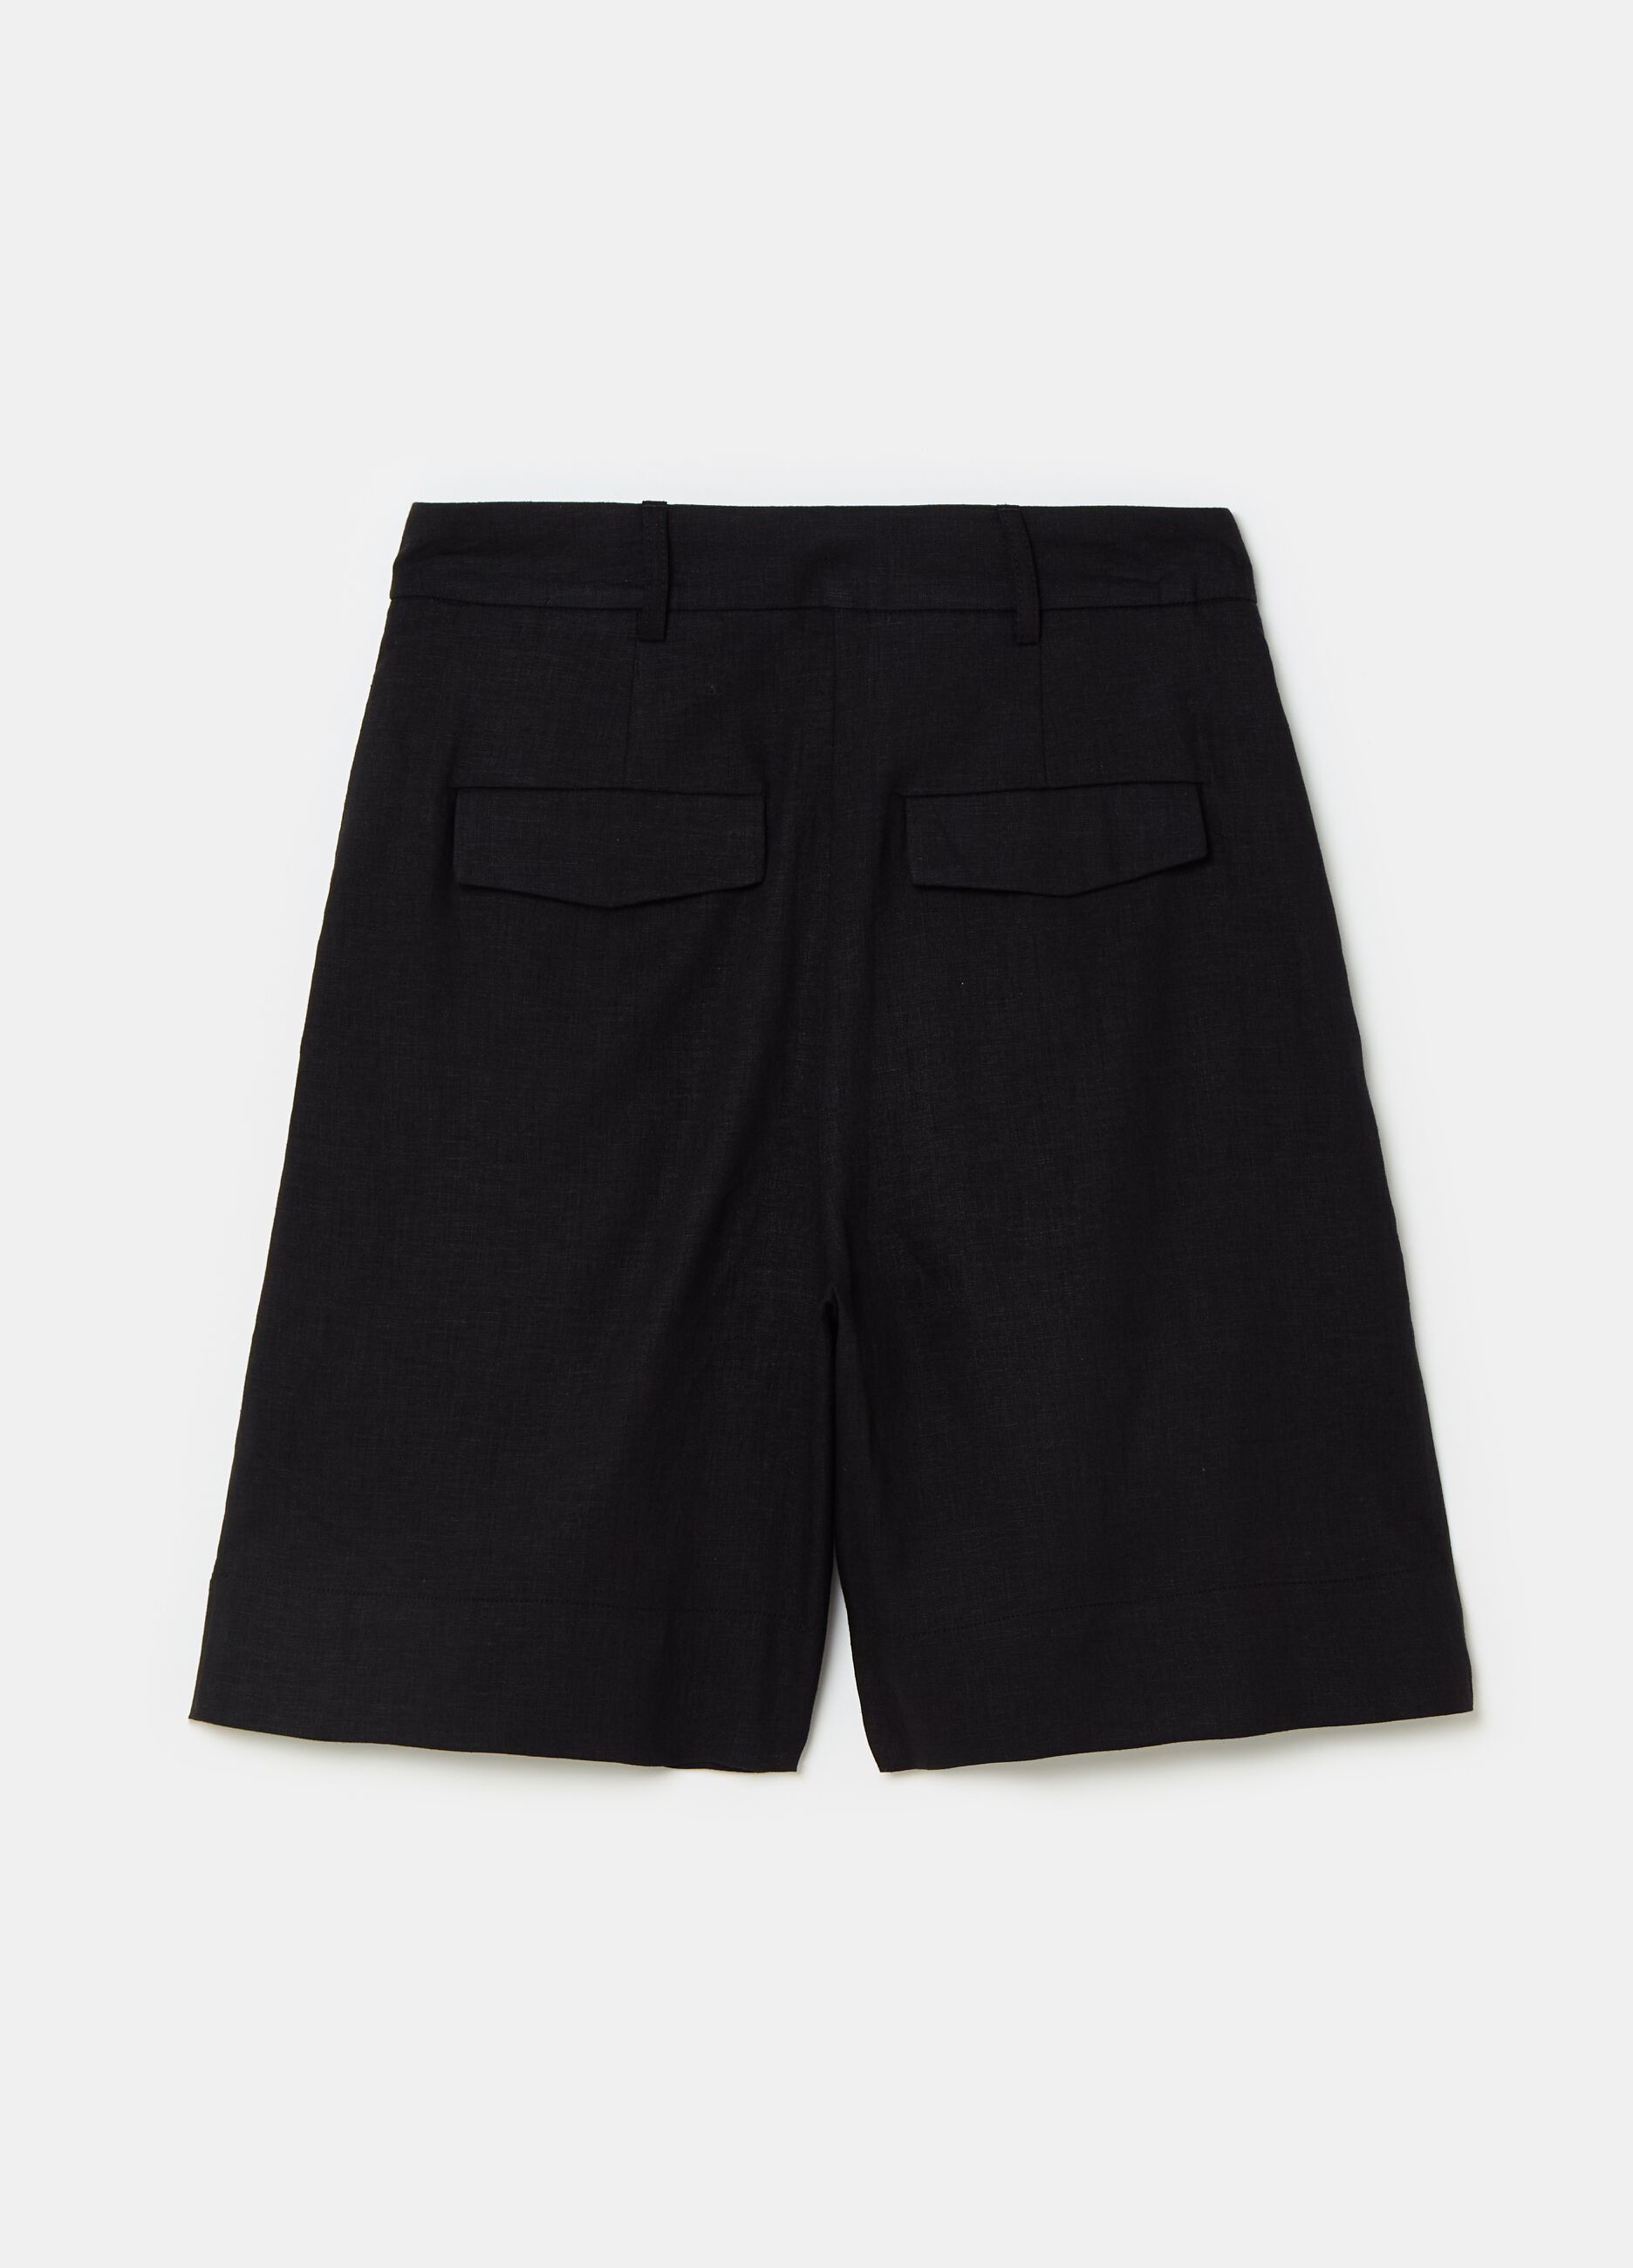 Contemporary shorts with pleating